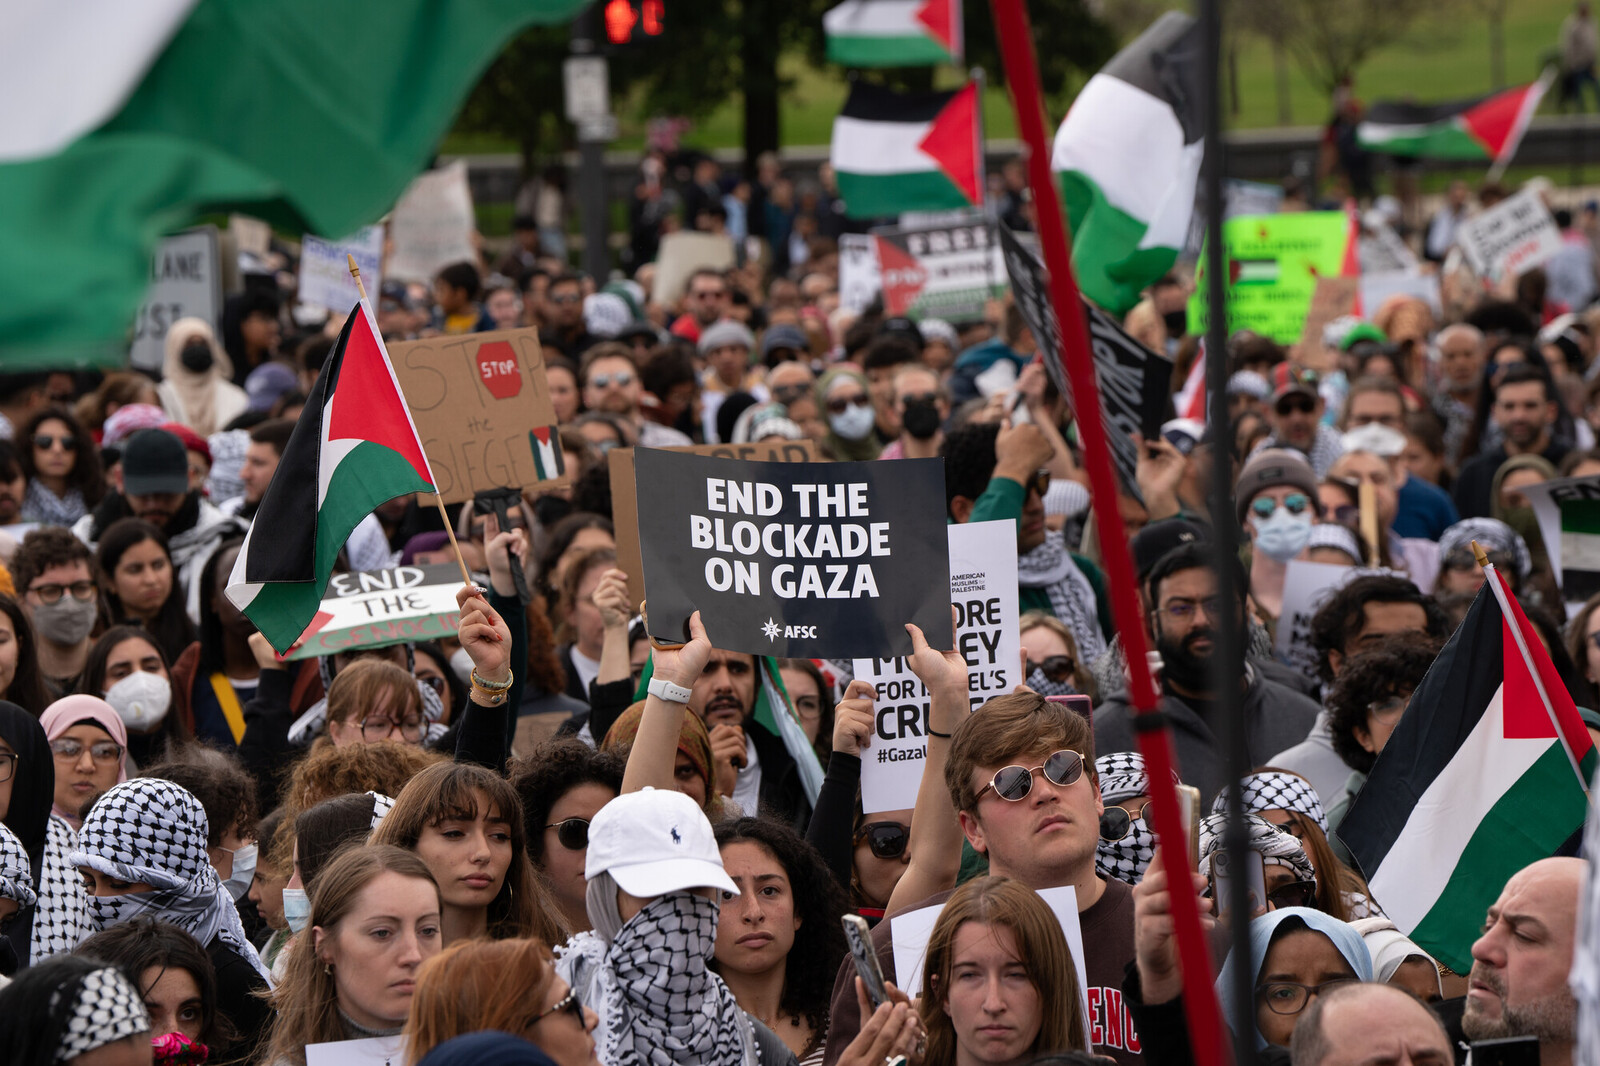 Crowd of protesters supporting Gaza